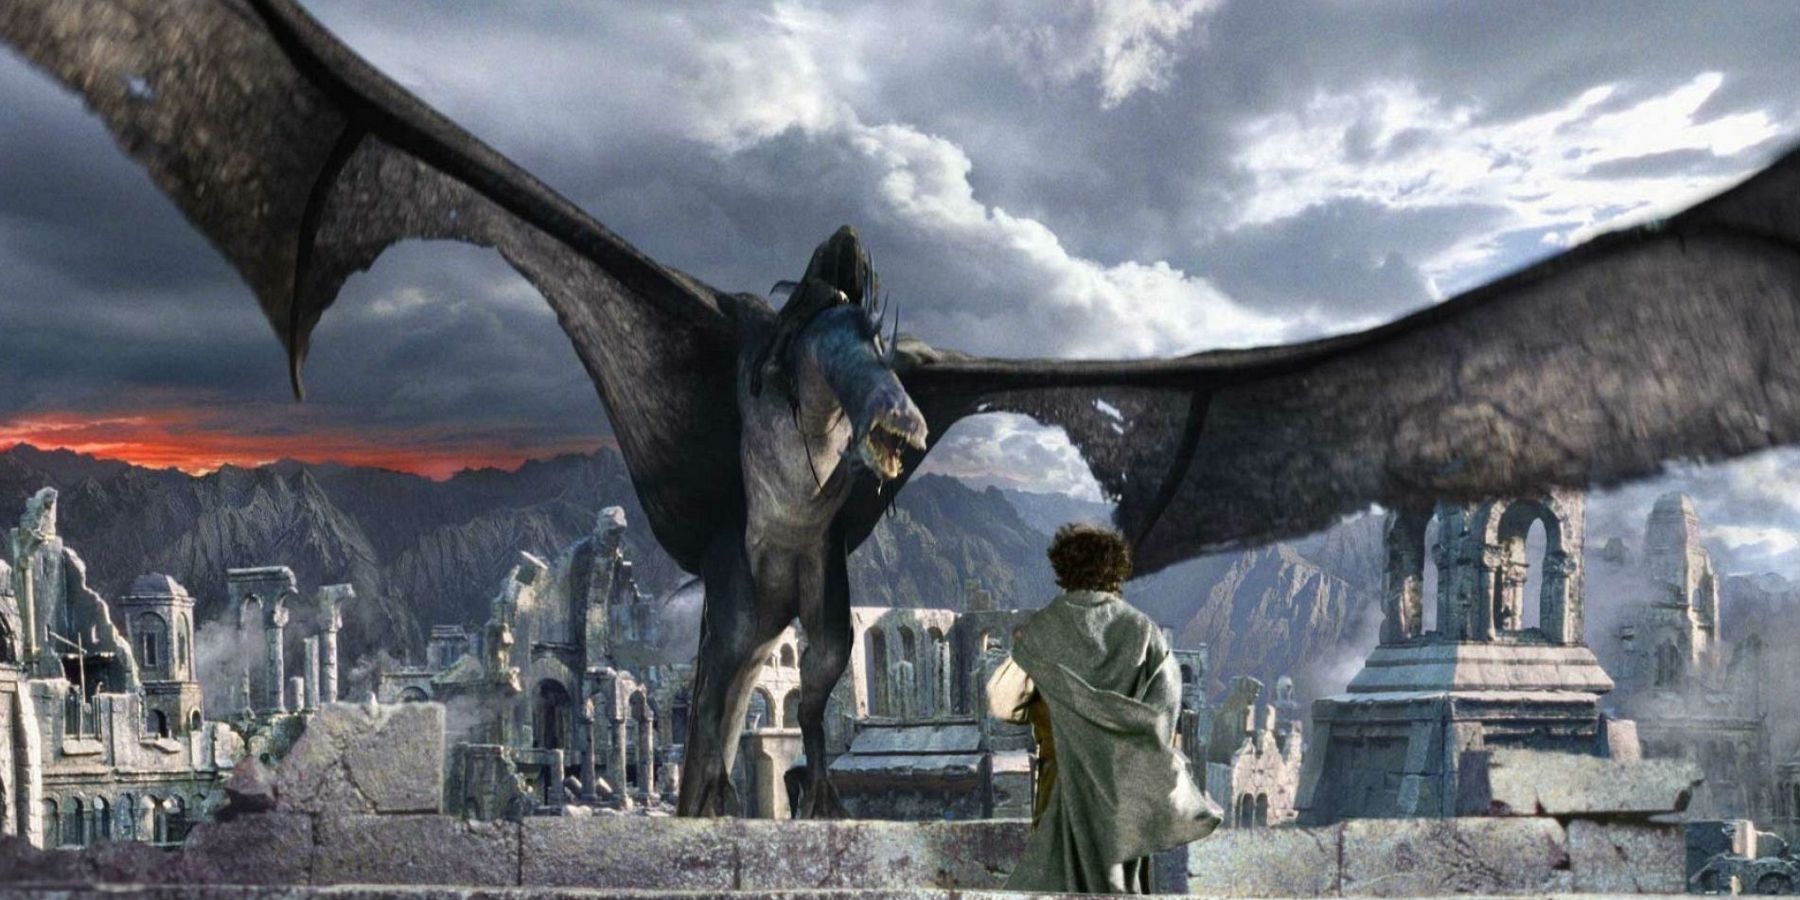 A Fell Beast in the 2002 high fantasy film Lord of the Rings: The Two Towers.